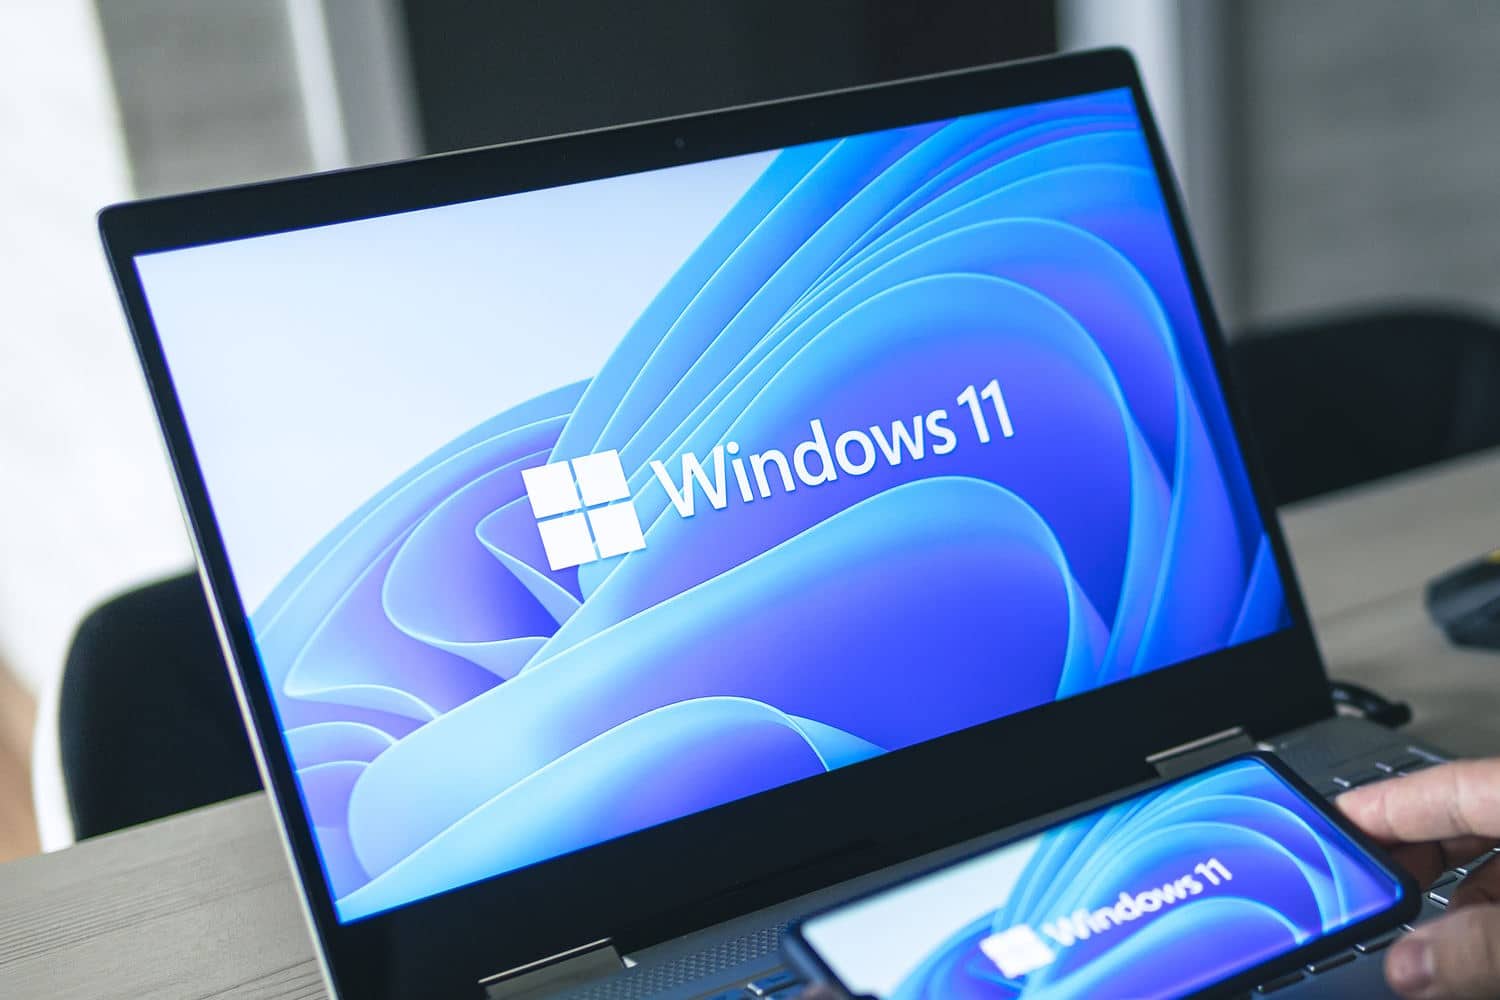 Windows 11 23H2 ISO image now available for download 